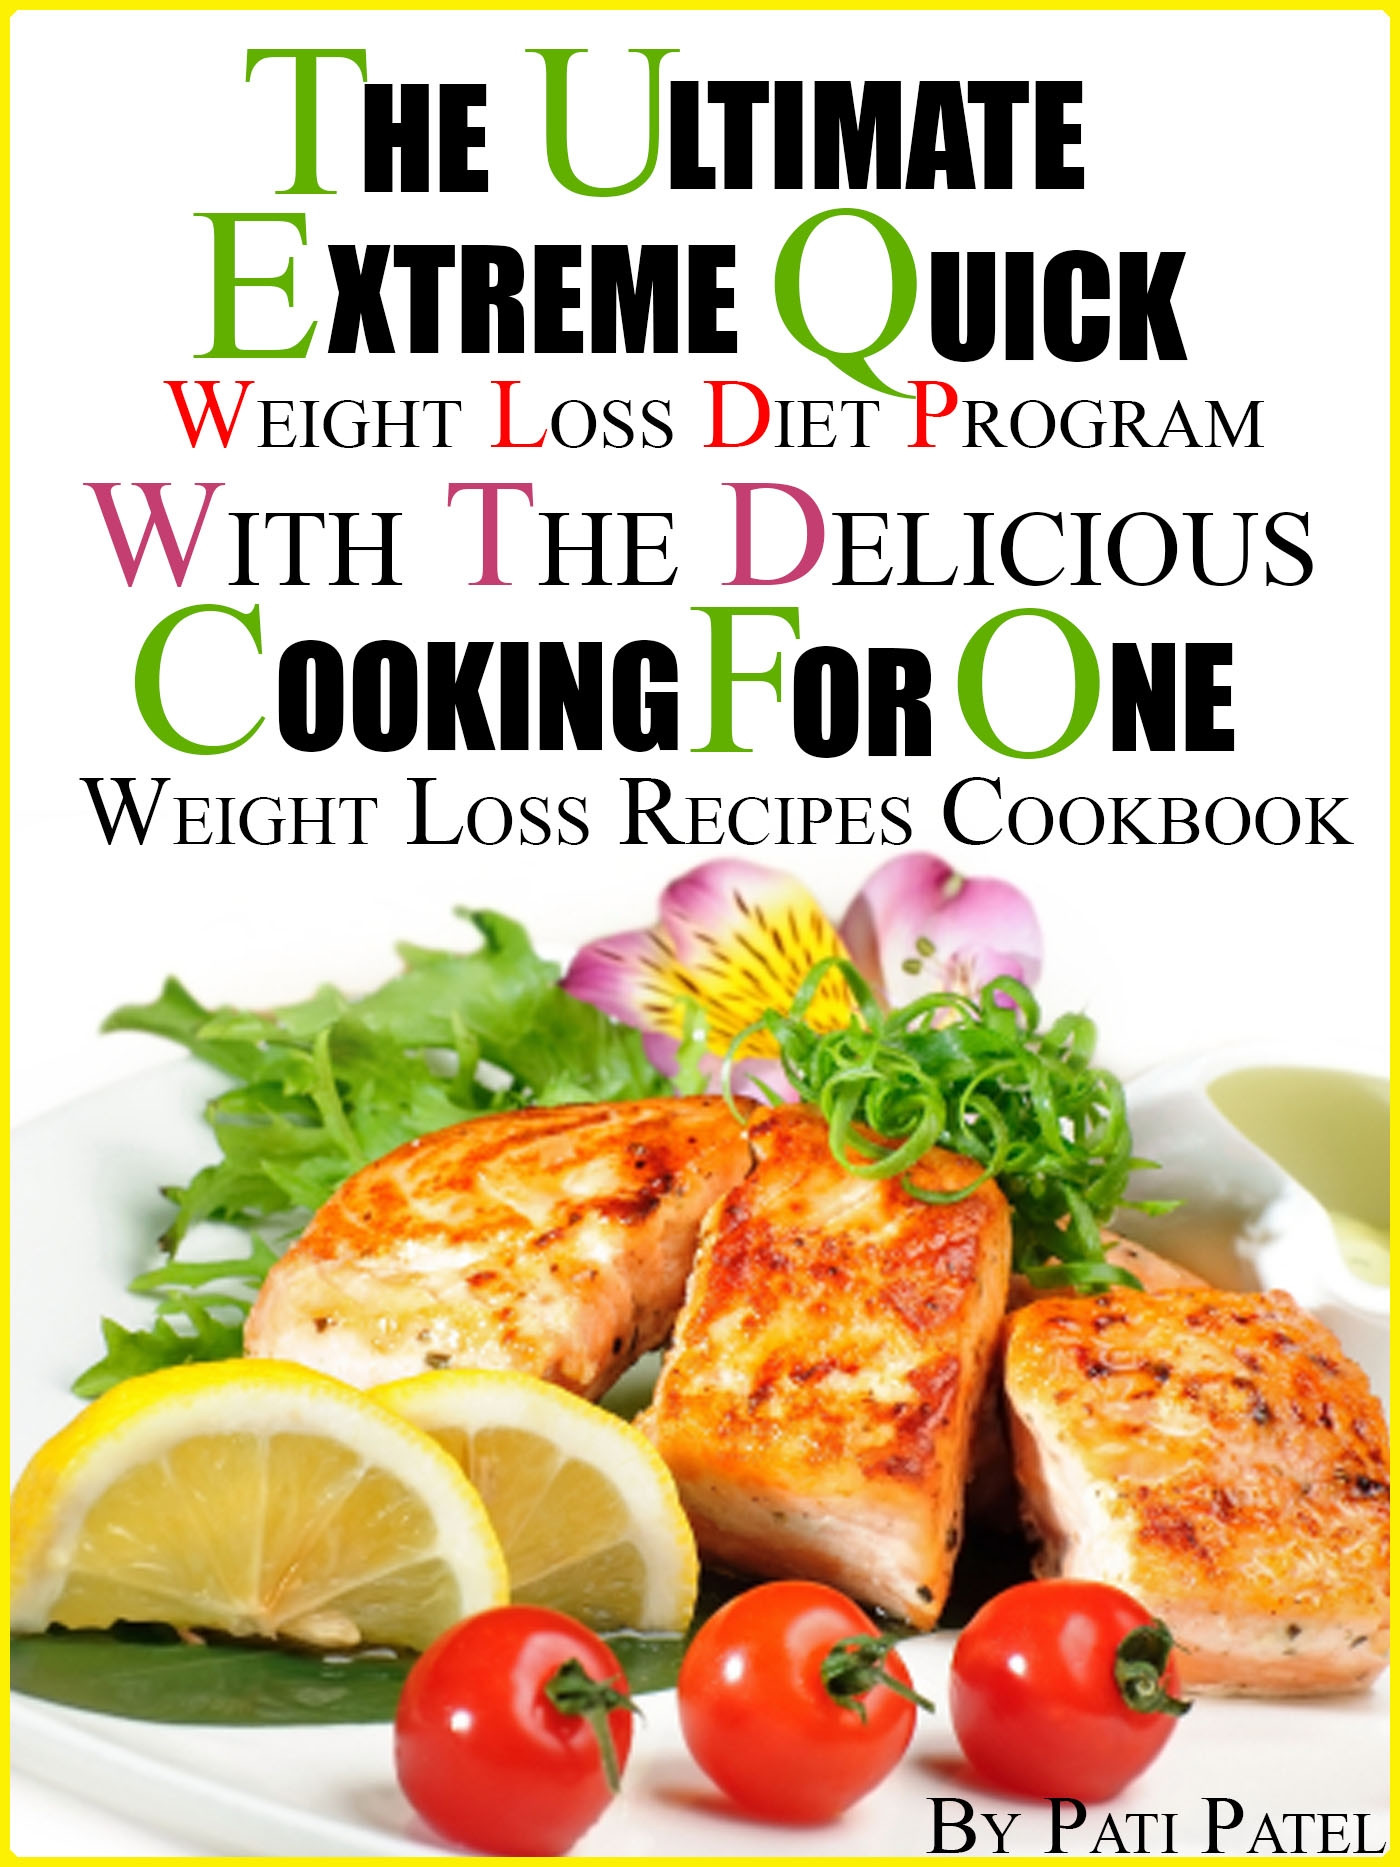 Extreme Weight Loss Recipes
 Download Read "The Green Coffee Bean Quick Weight Loss